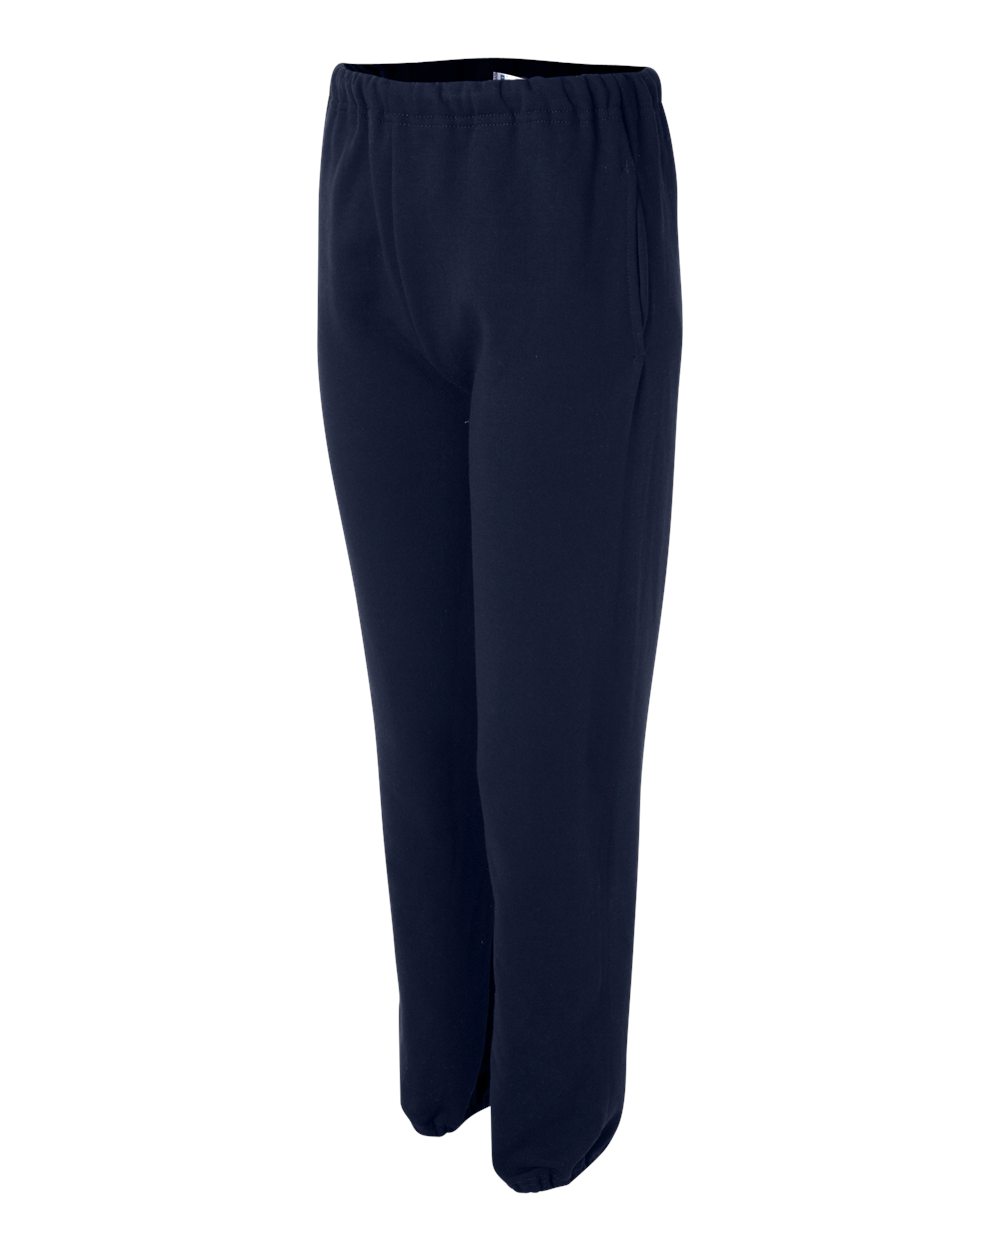 JERZEES 4950BR - Youth Sweatpant With Pockets